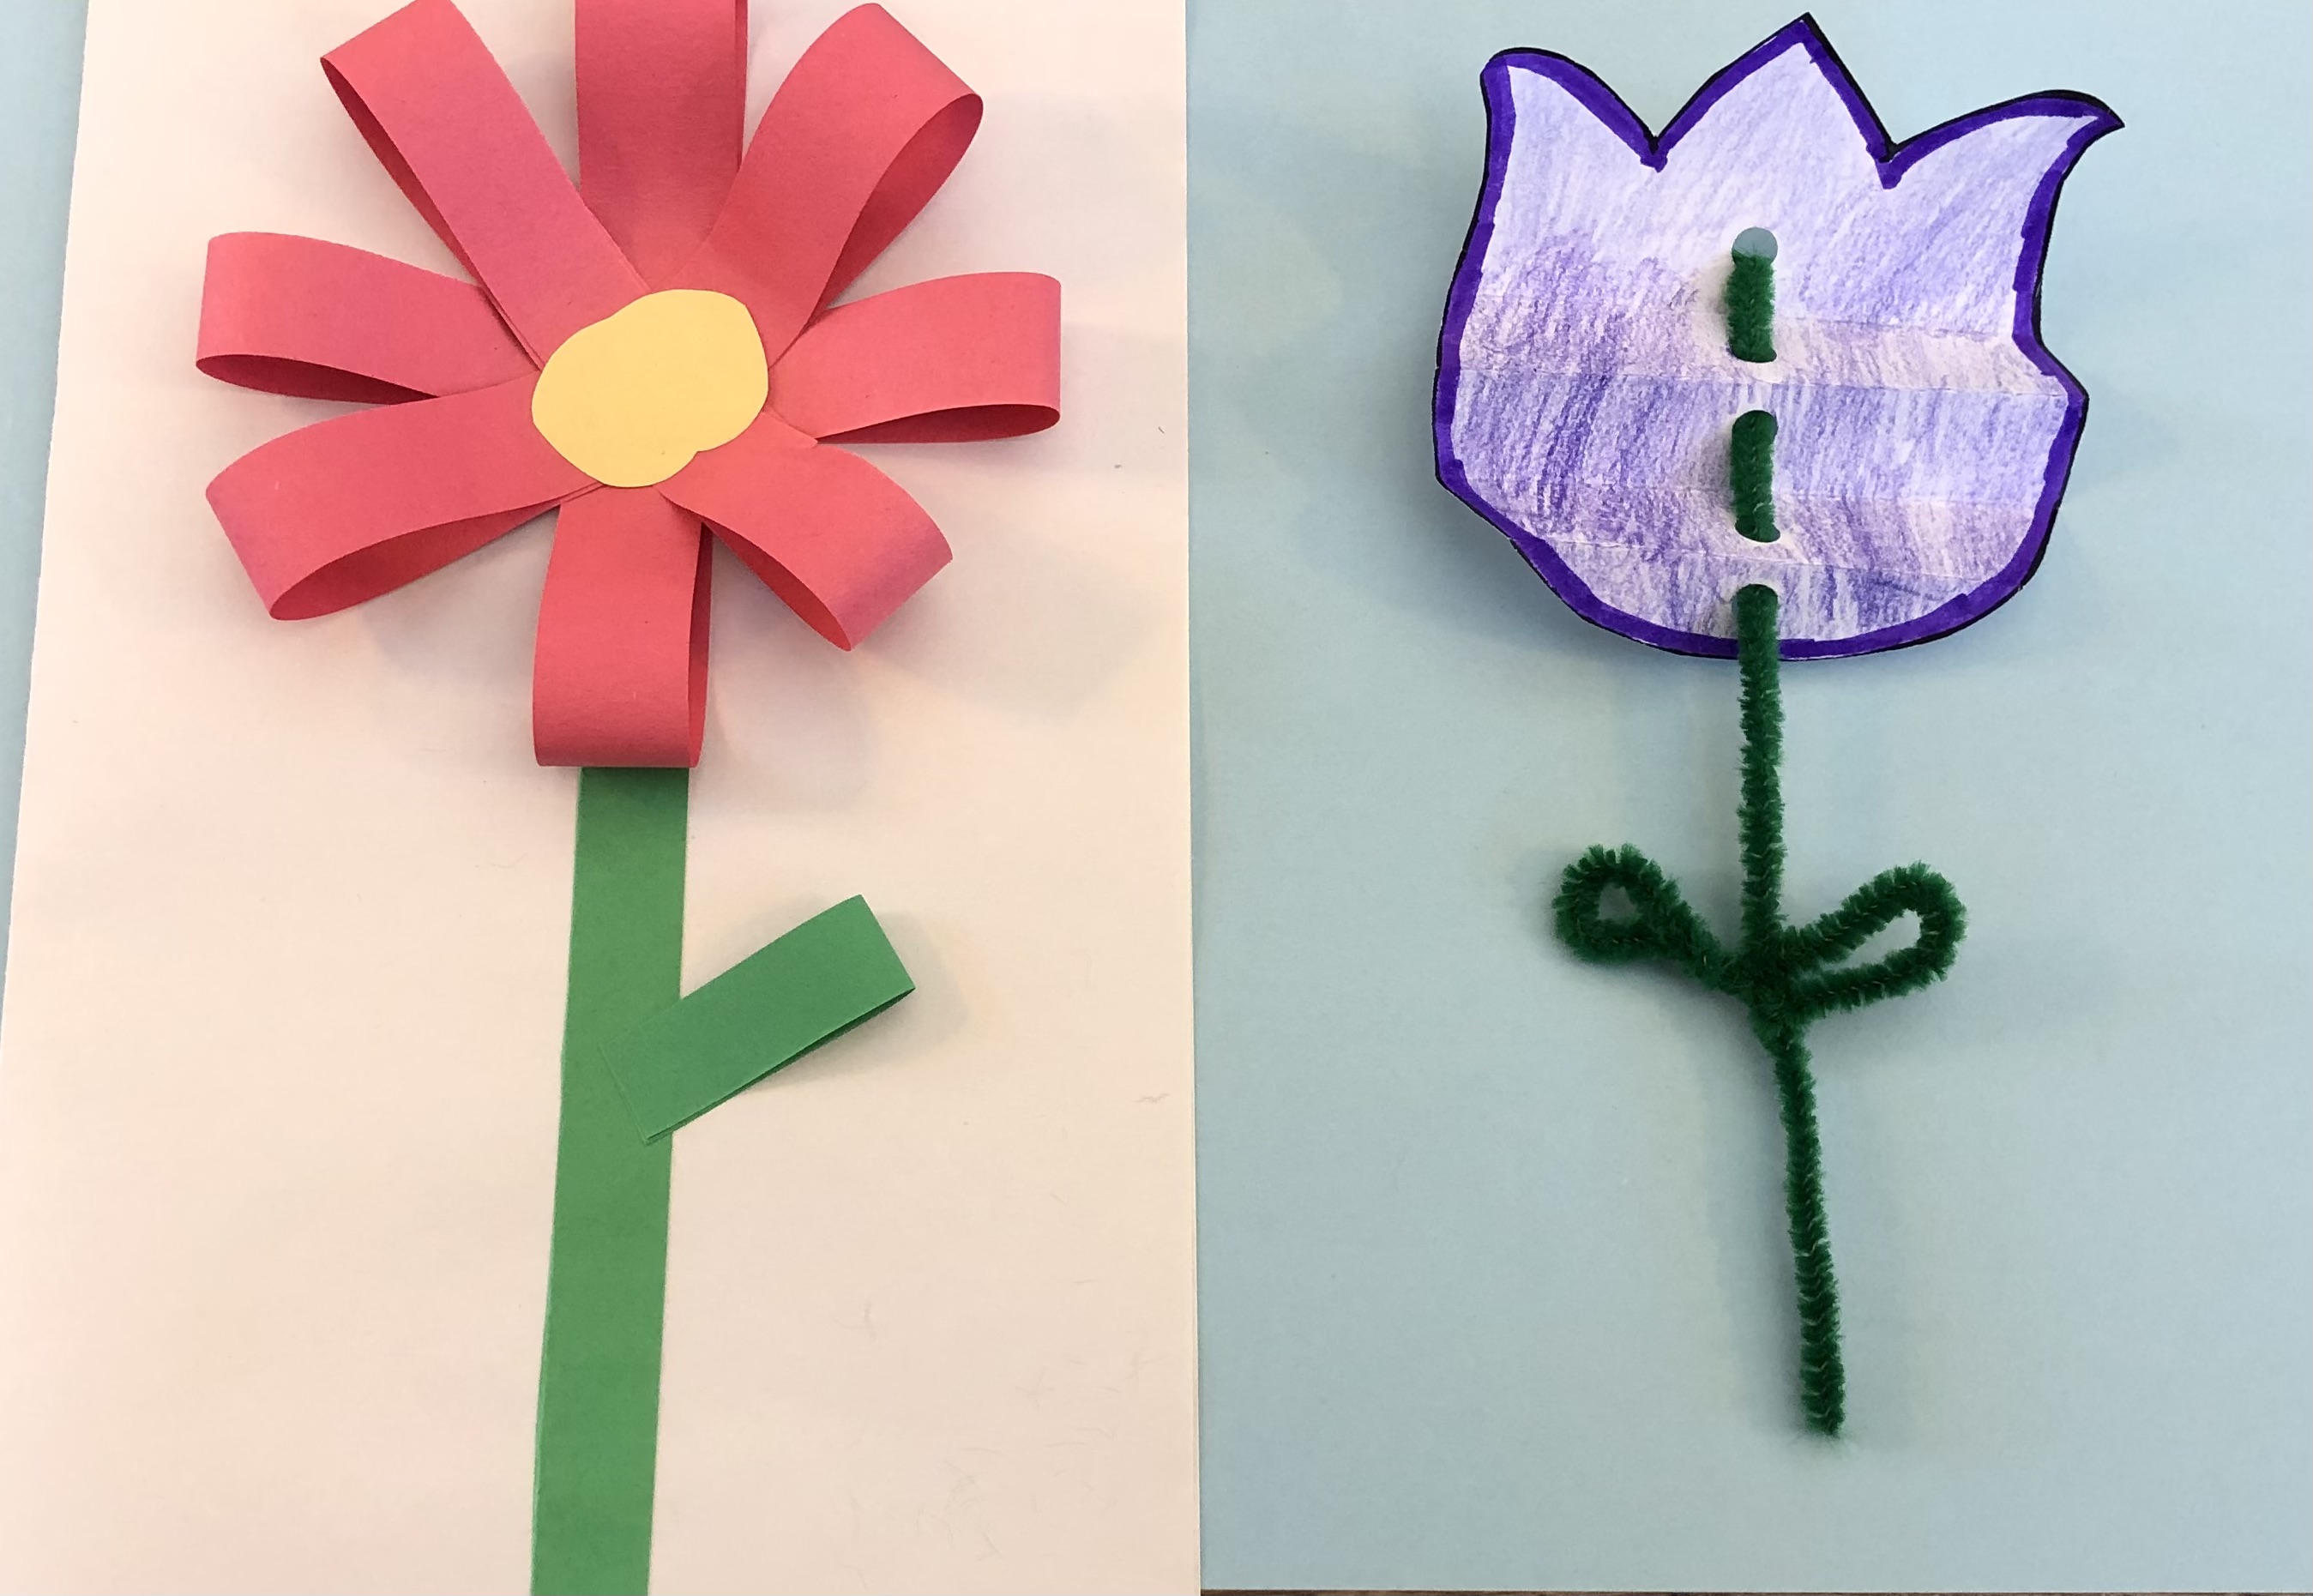 Examples of the two flower crafts, one is on the front of a card and the other is a tulip. 